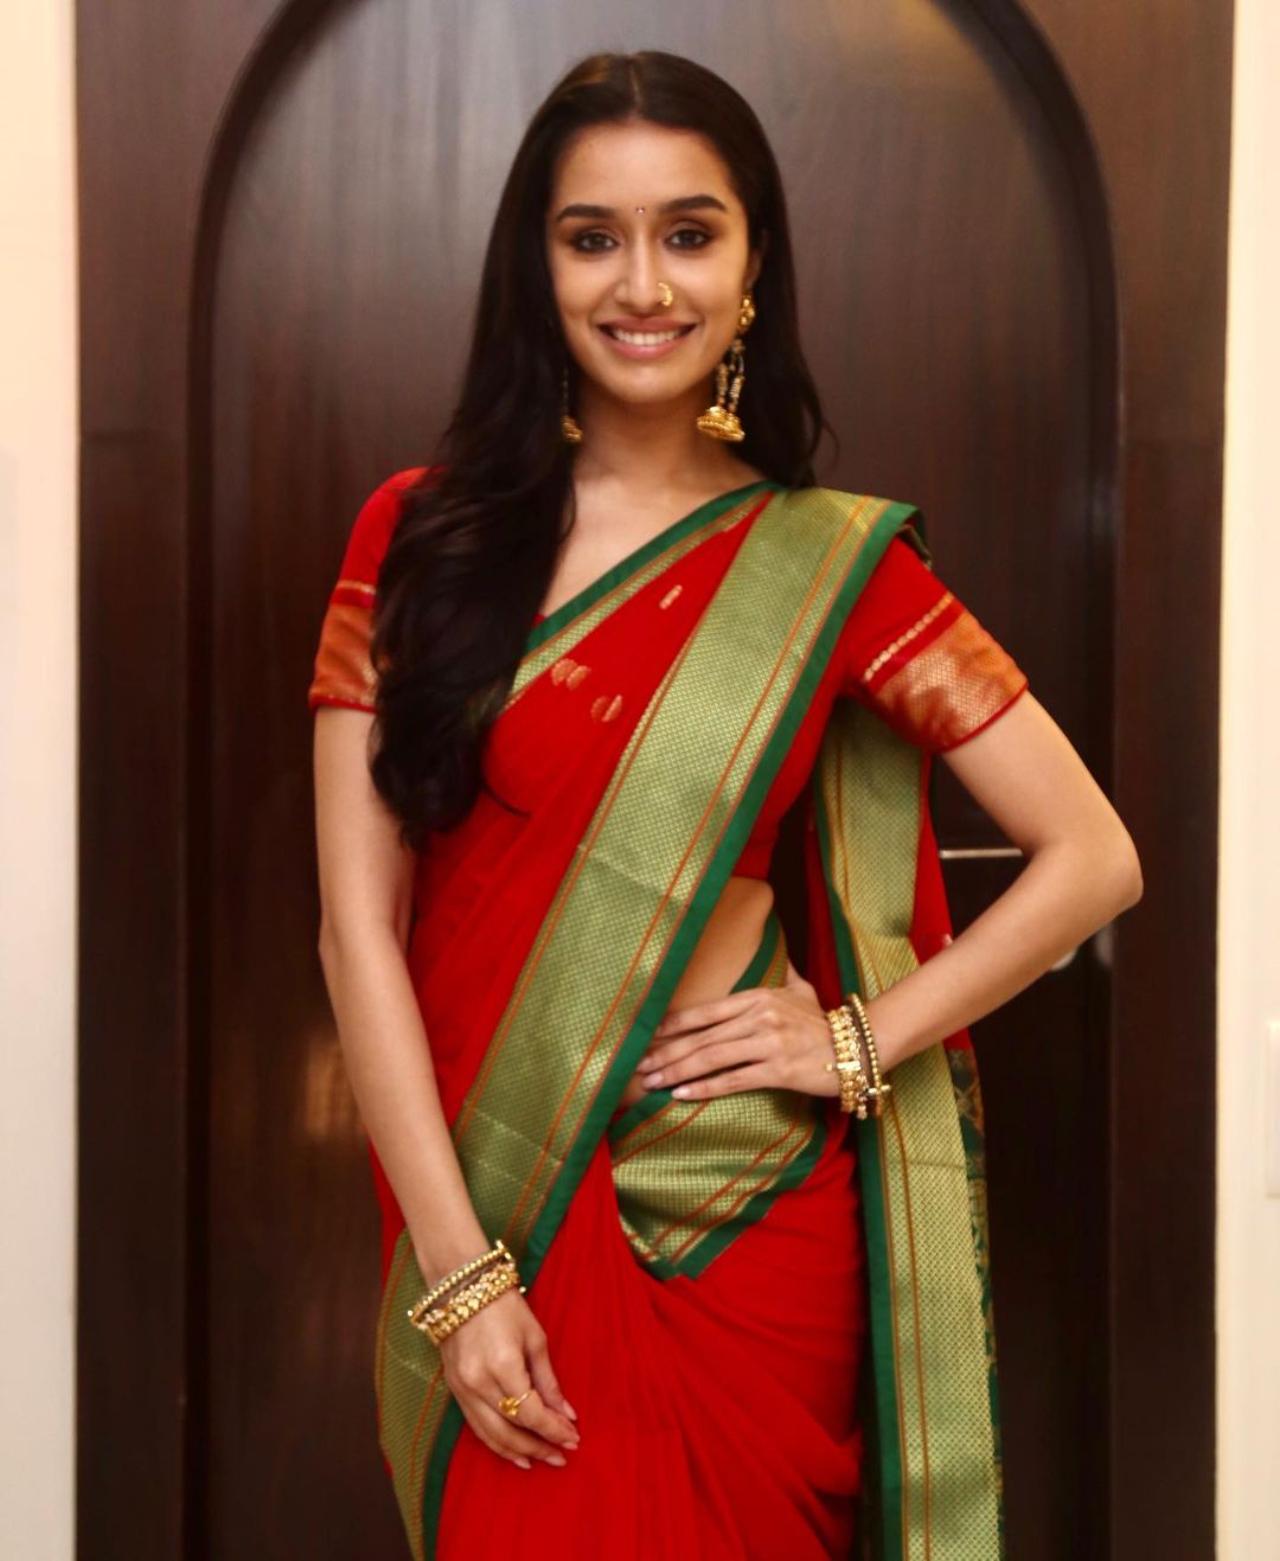 Shraddha Kapoor is a Marathi mulgi in and out. The actress took to her Instagram feed on Wednesday, on the occasion of Ganesh Chaturthi to share glimpses from day one of the festivity